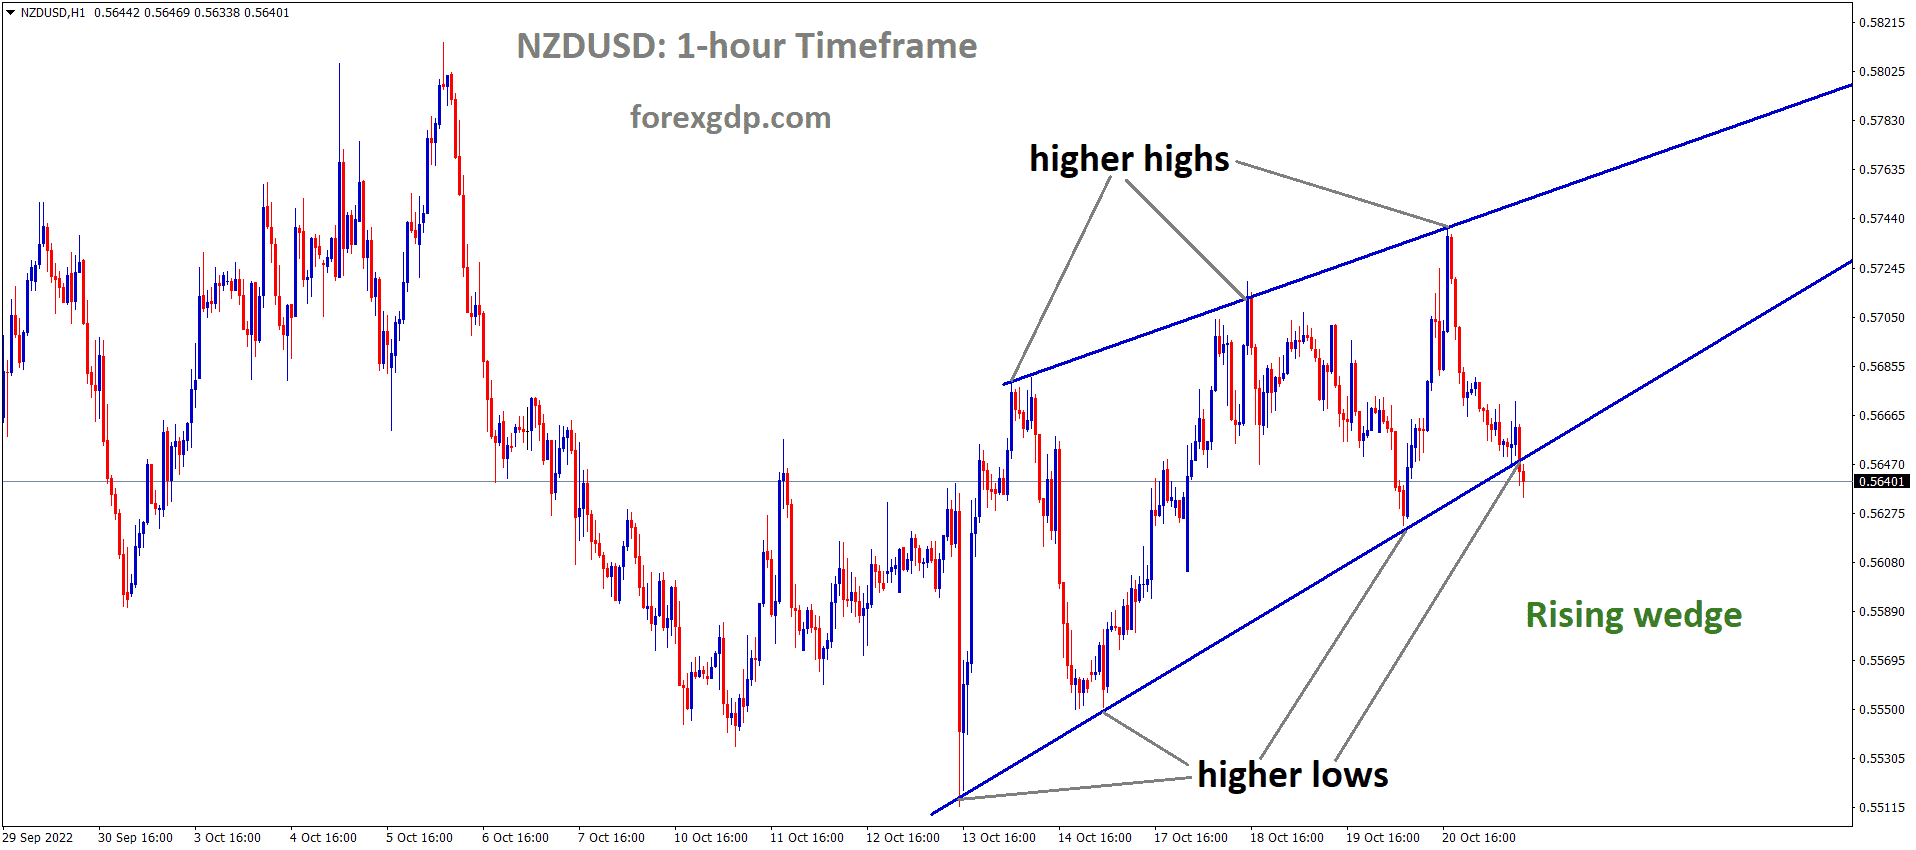 NZDUSD is moving in the Rising wedge pattern and the market has reached the higher low area of the pattern